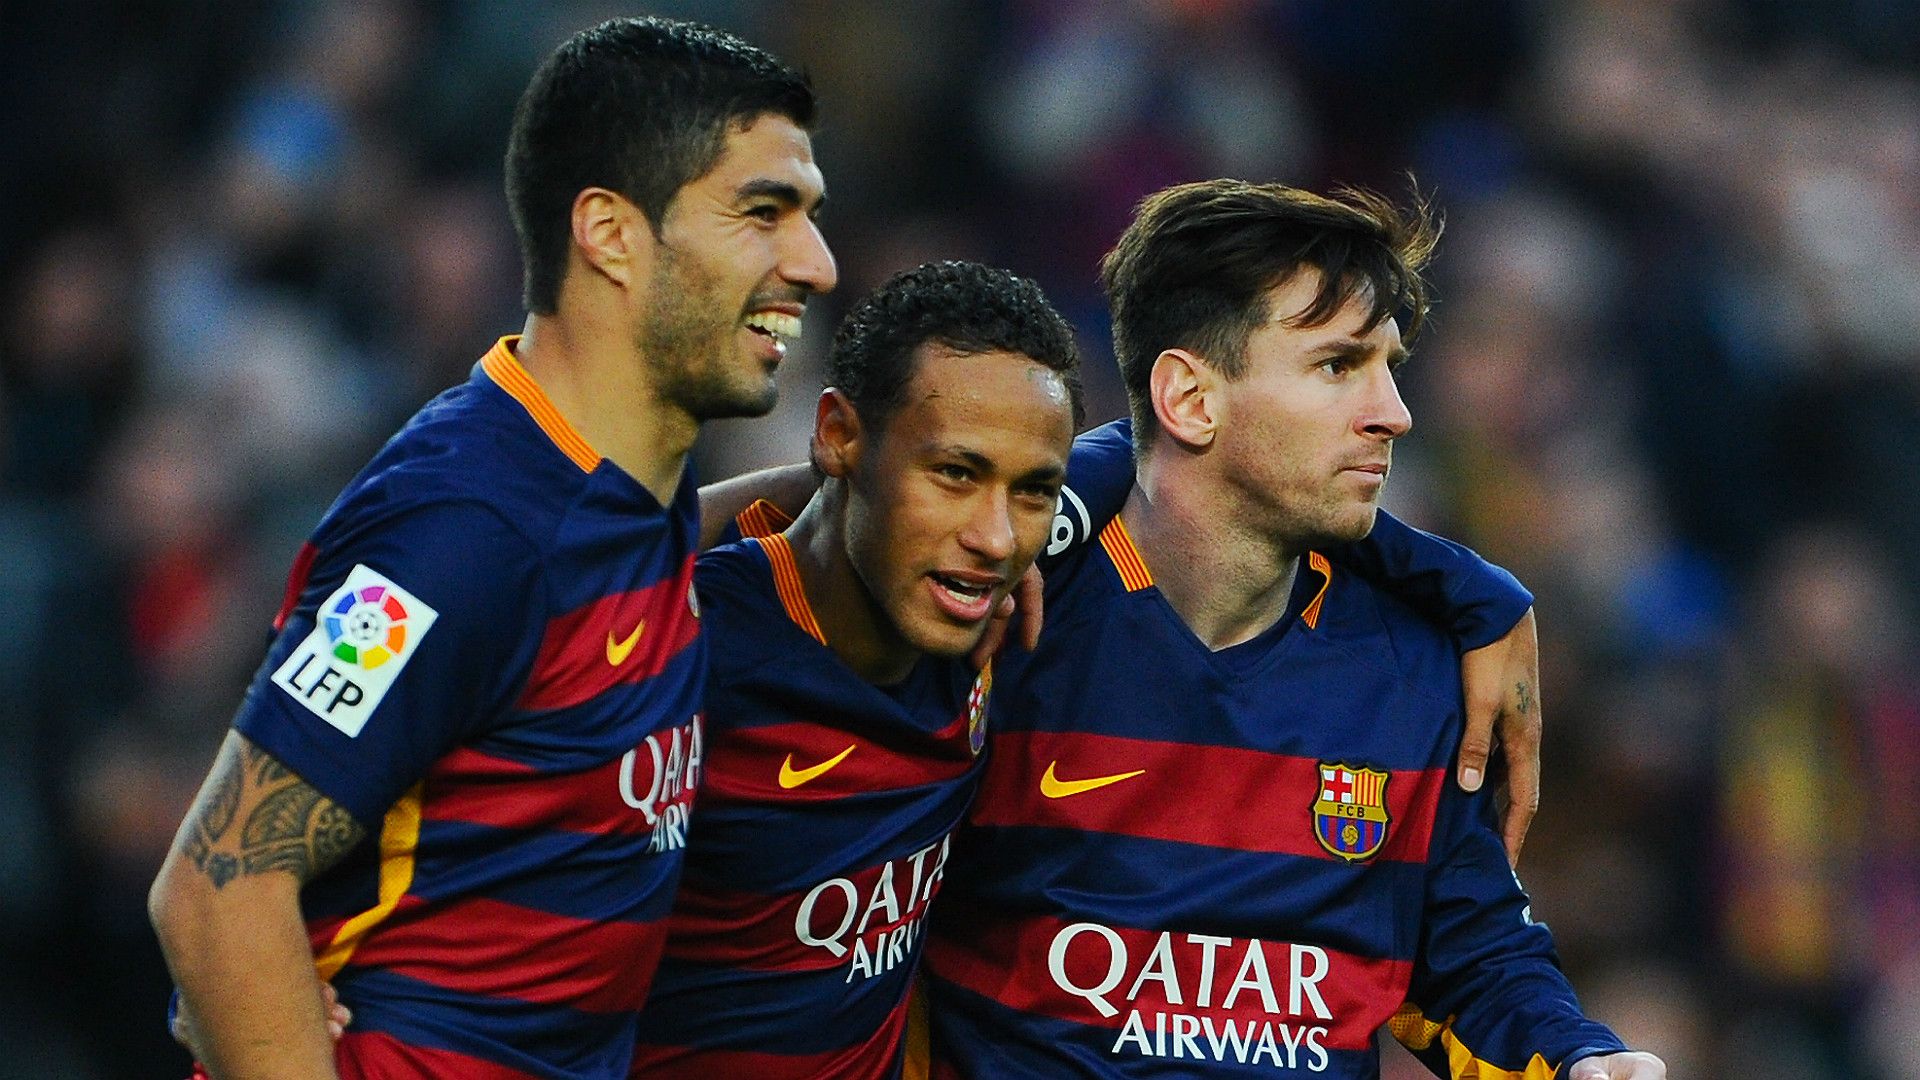 MSN too hot too handle yet again. but don't forget the supporting cast